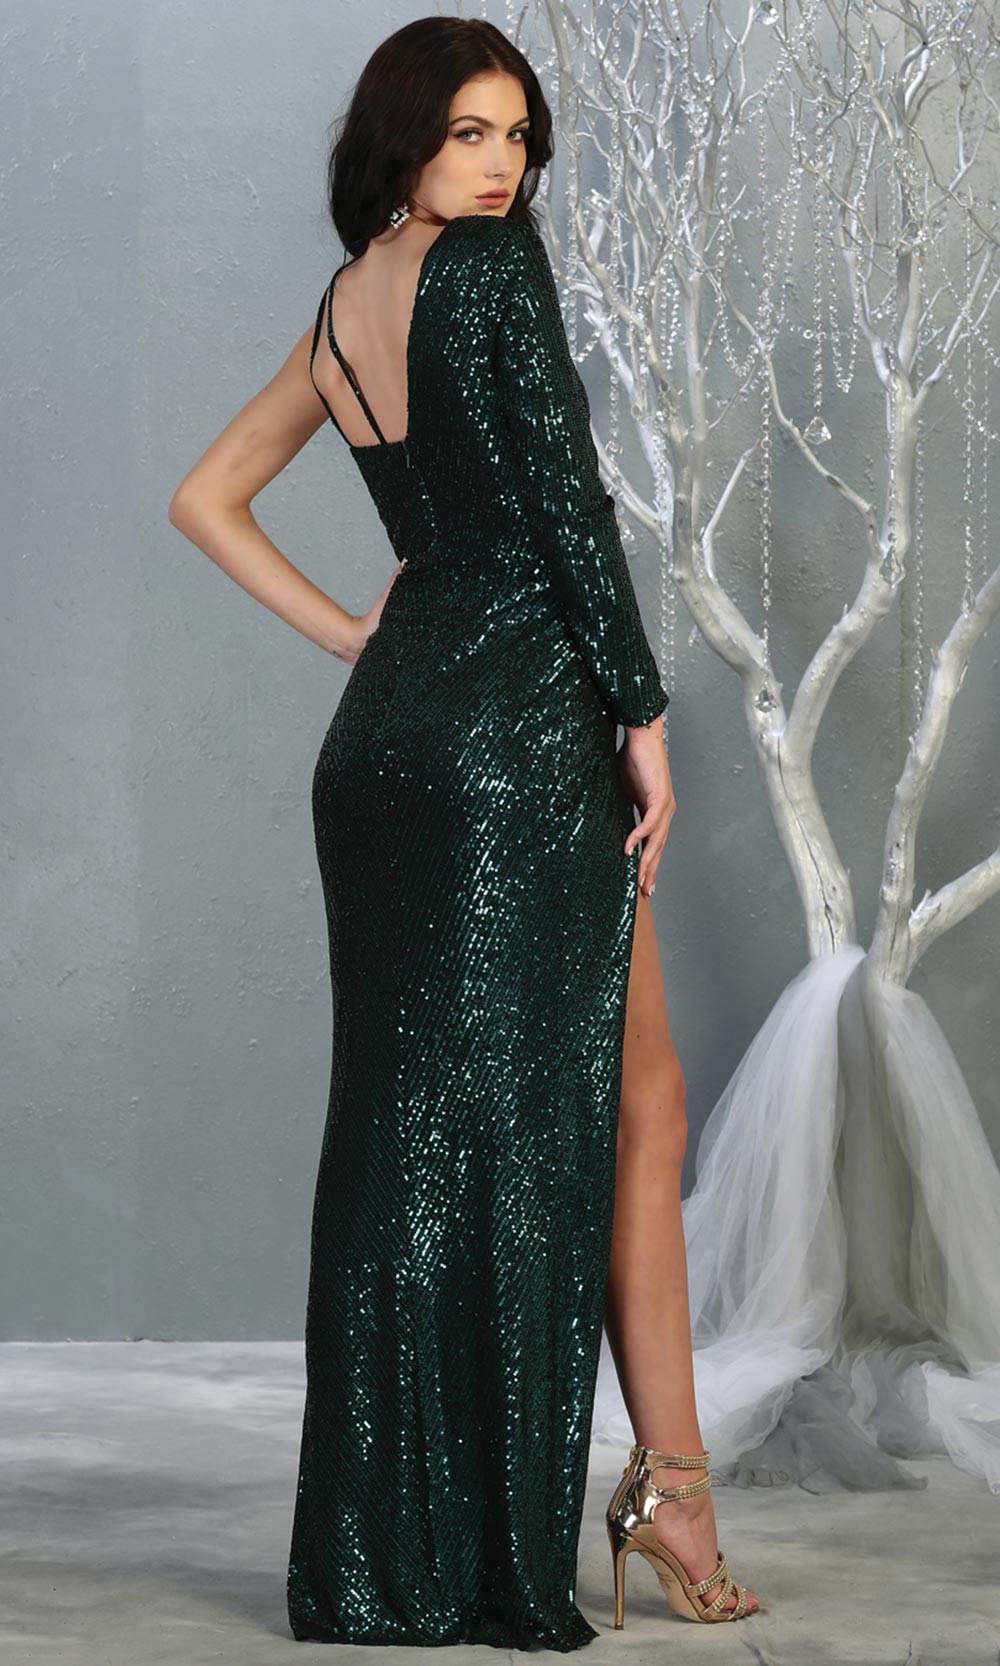 Mayqueen RQ7867 long hunter green sequin one shoulder evening gown w/long sleeve. Full length fitted dress is perfect for  enagagement/e-shoot dress, formal wedding guest, evening party dress, prom, engagement, wedding reception. Plus sizes avail-b.jpg